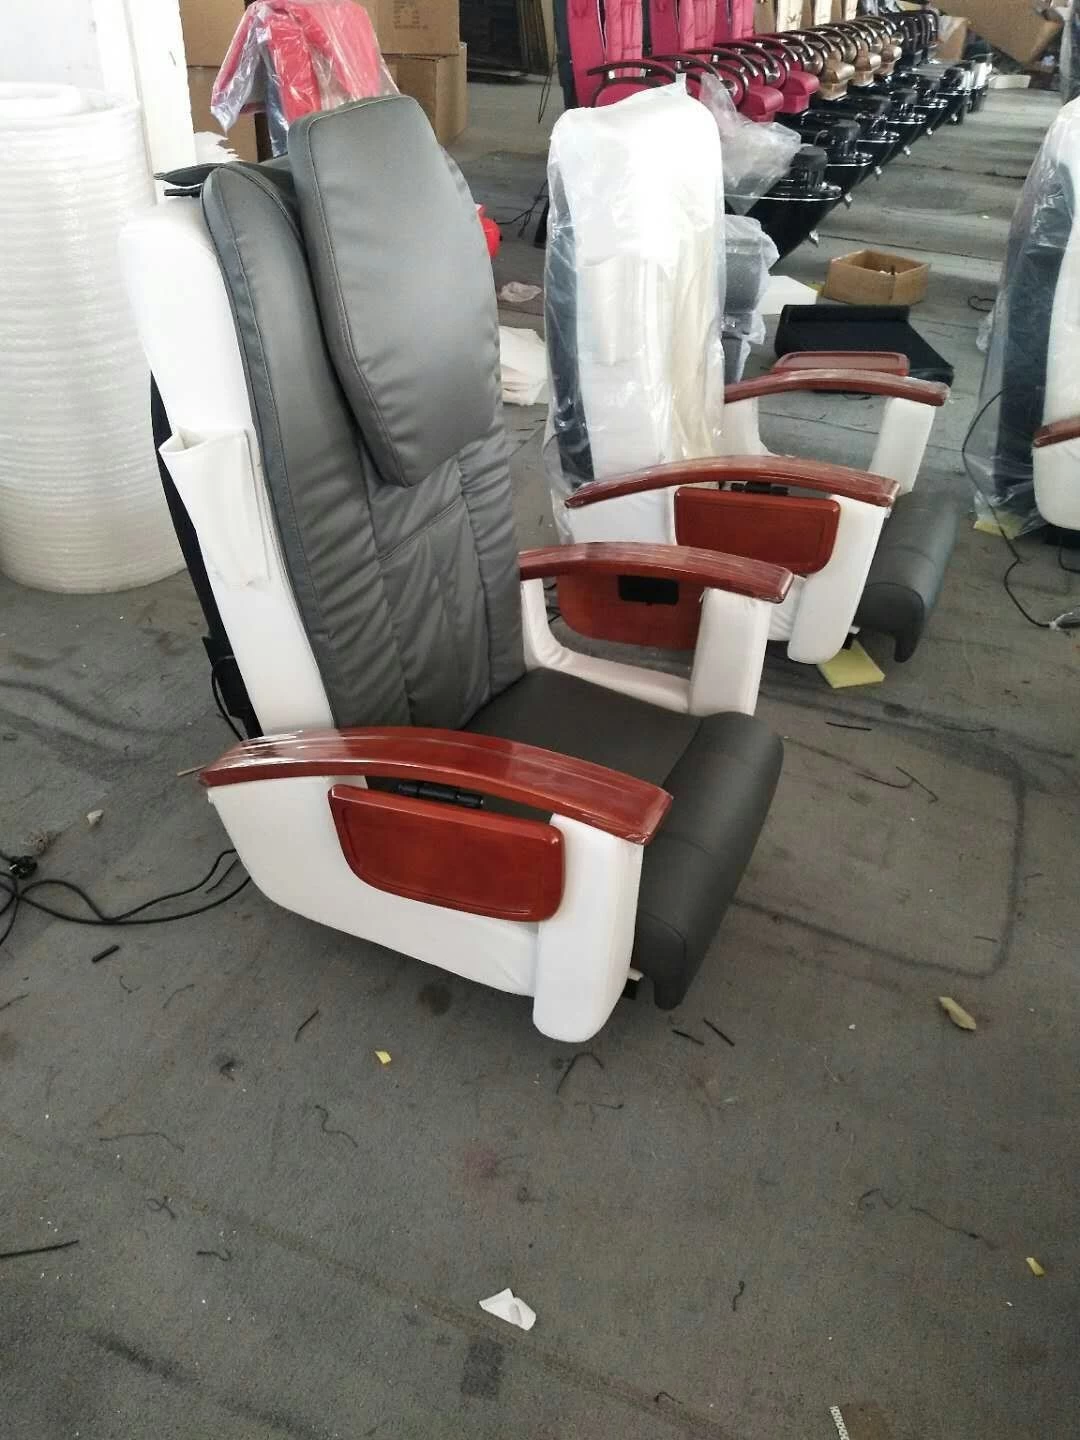 pedicure station chair grey and white leather cover deluxe pedicure spa massage chair for nail salon